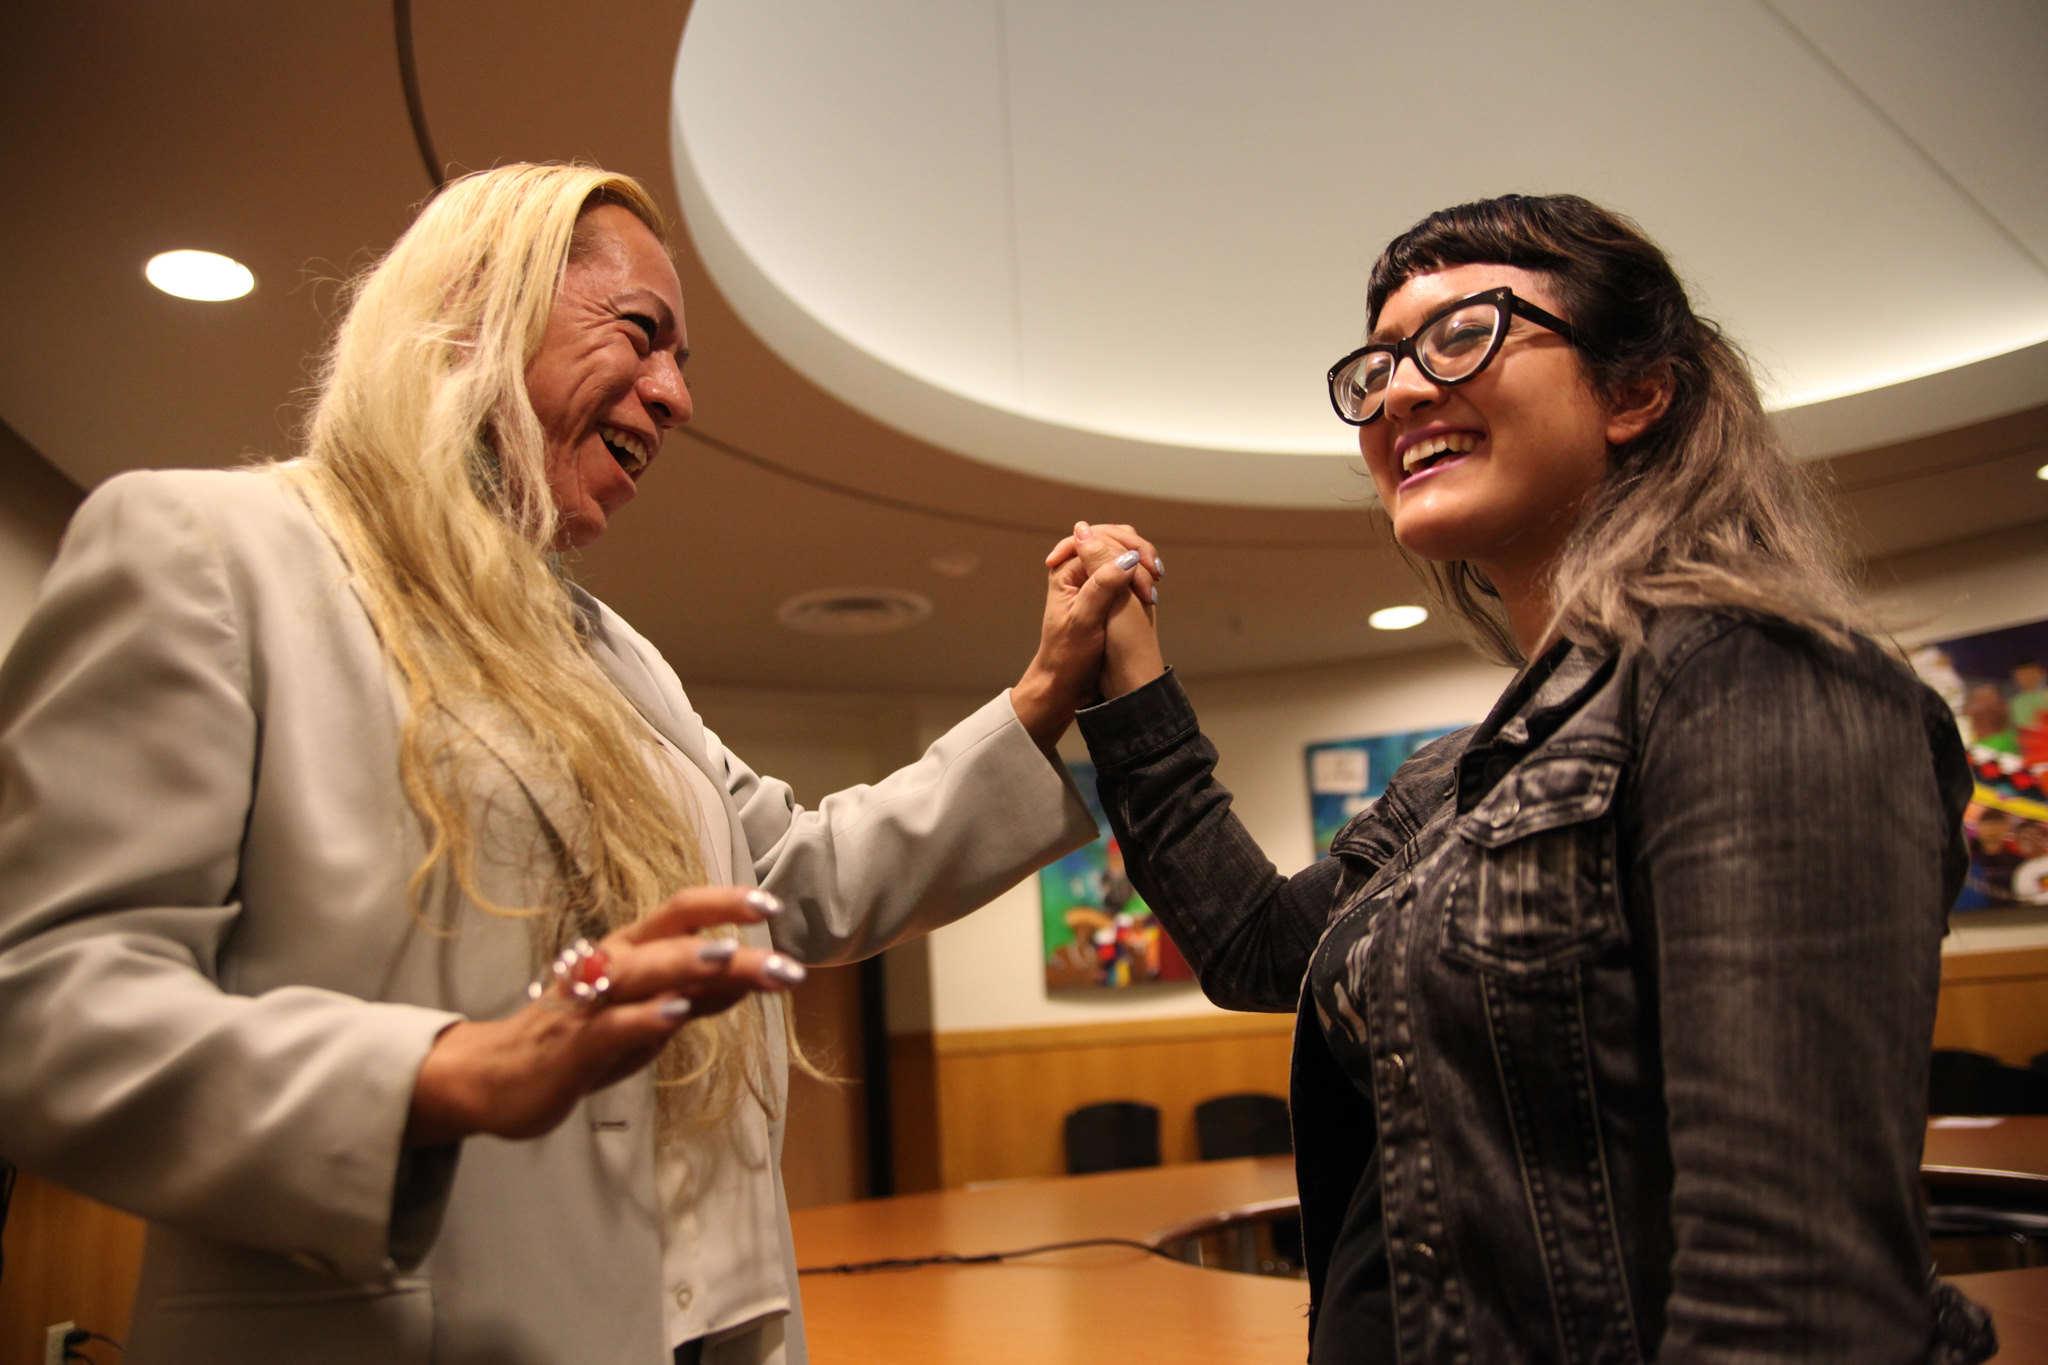 Bamby Salcedo entwines hands with Deziree Miller after Q&A with actvist in the ROMC Reading Room on Thursday, Oct. 30, 2014.